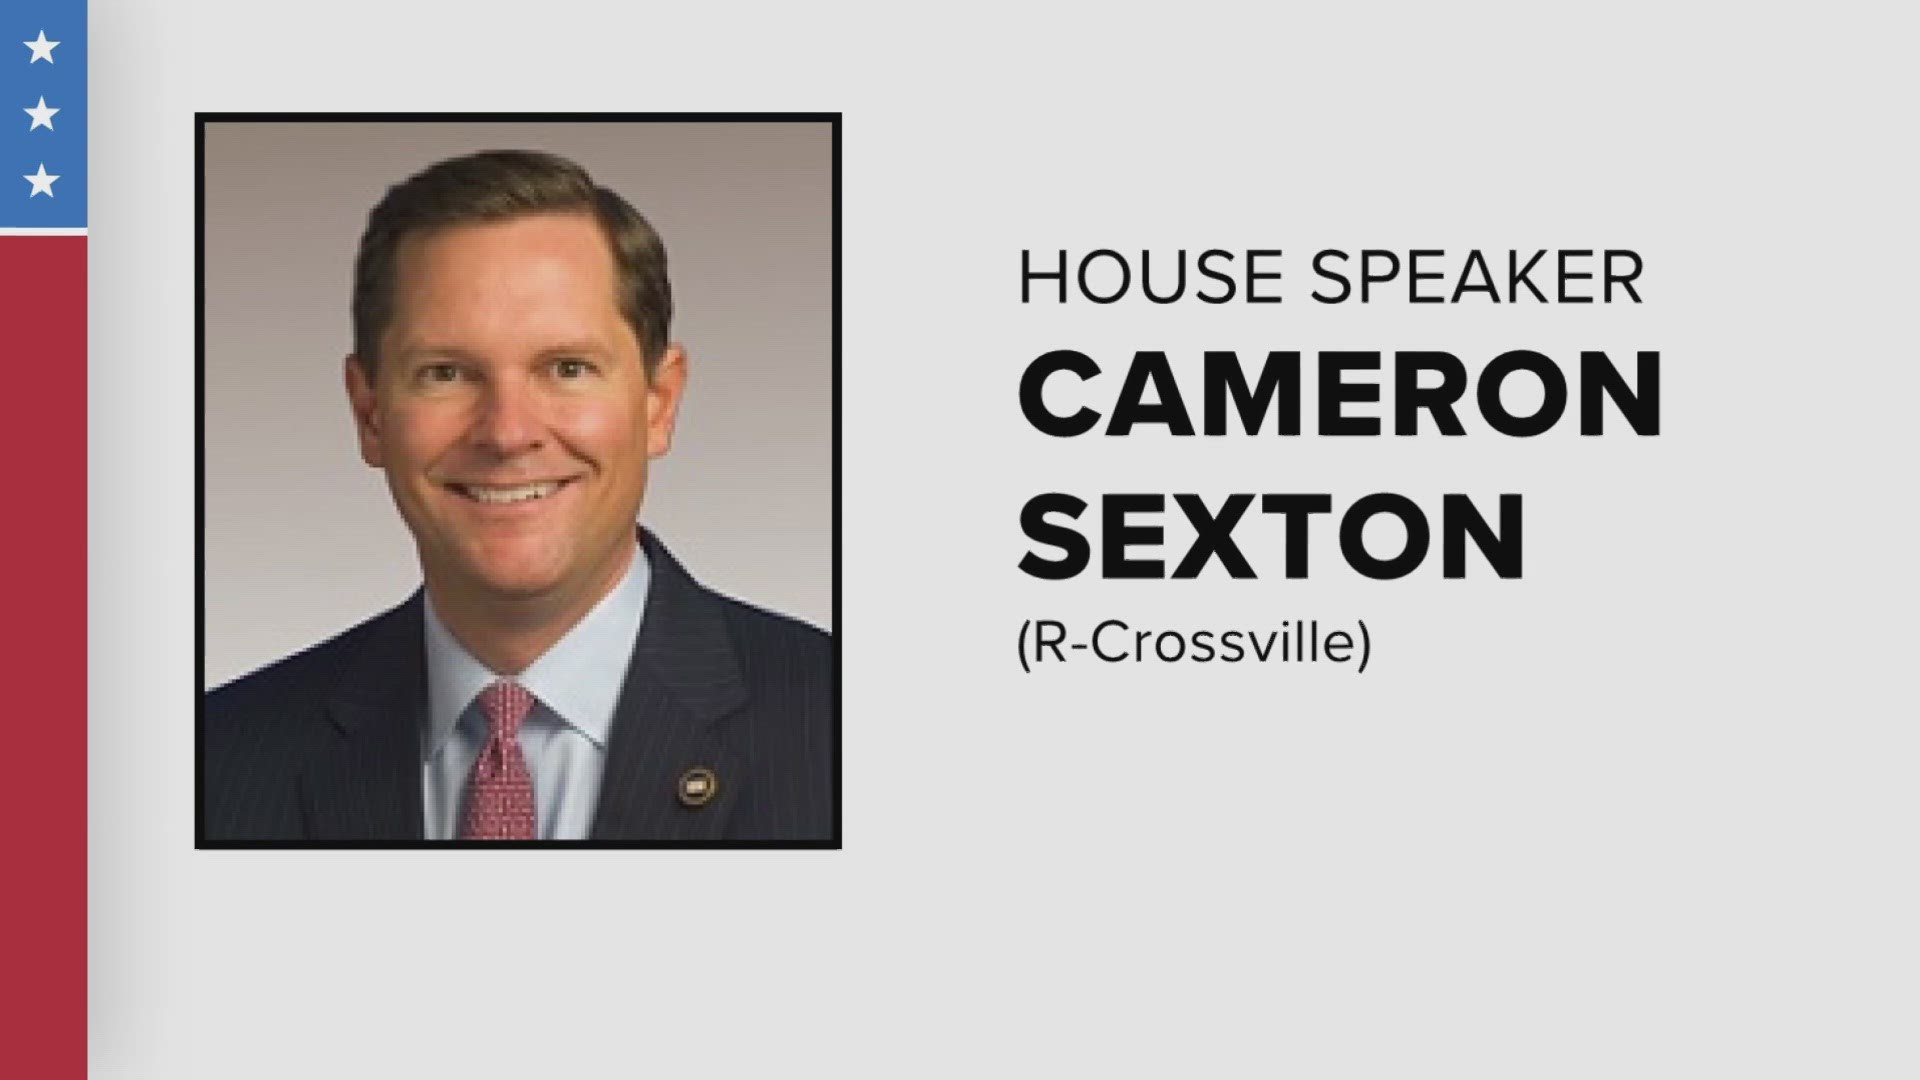 A report by the independent newsletter, Popular Info said the Speaker bought a house in Nashville even though he represents Crossville. He has a home in Crossville.